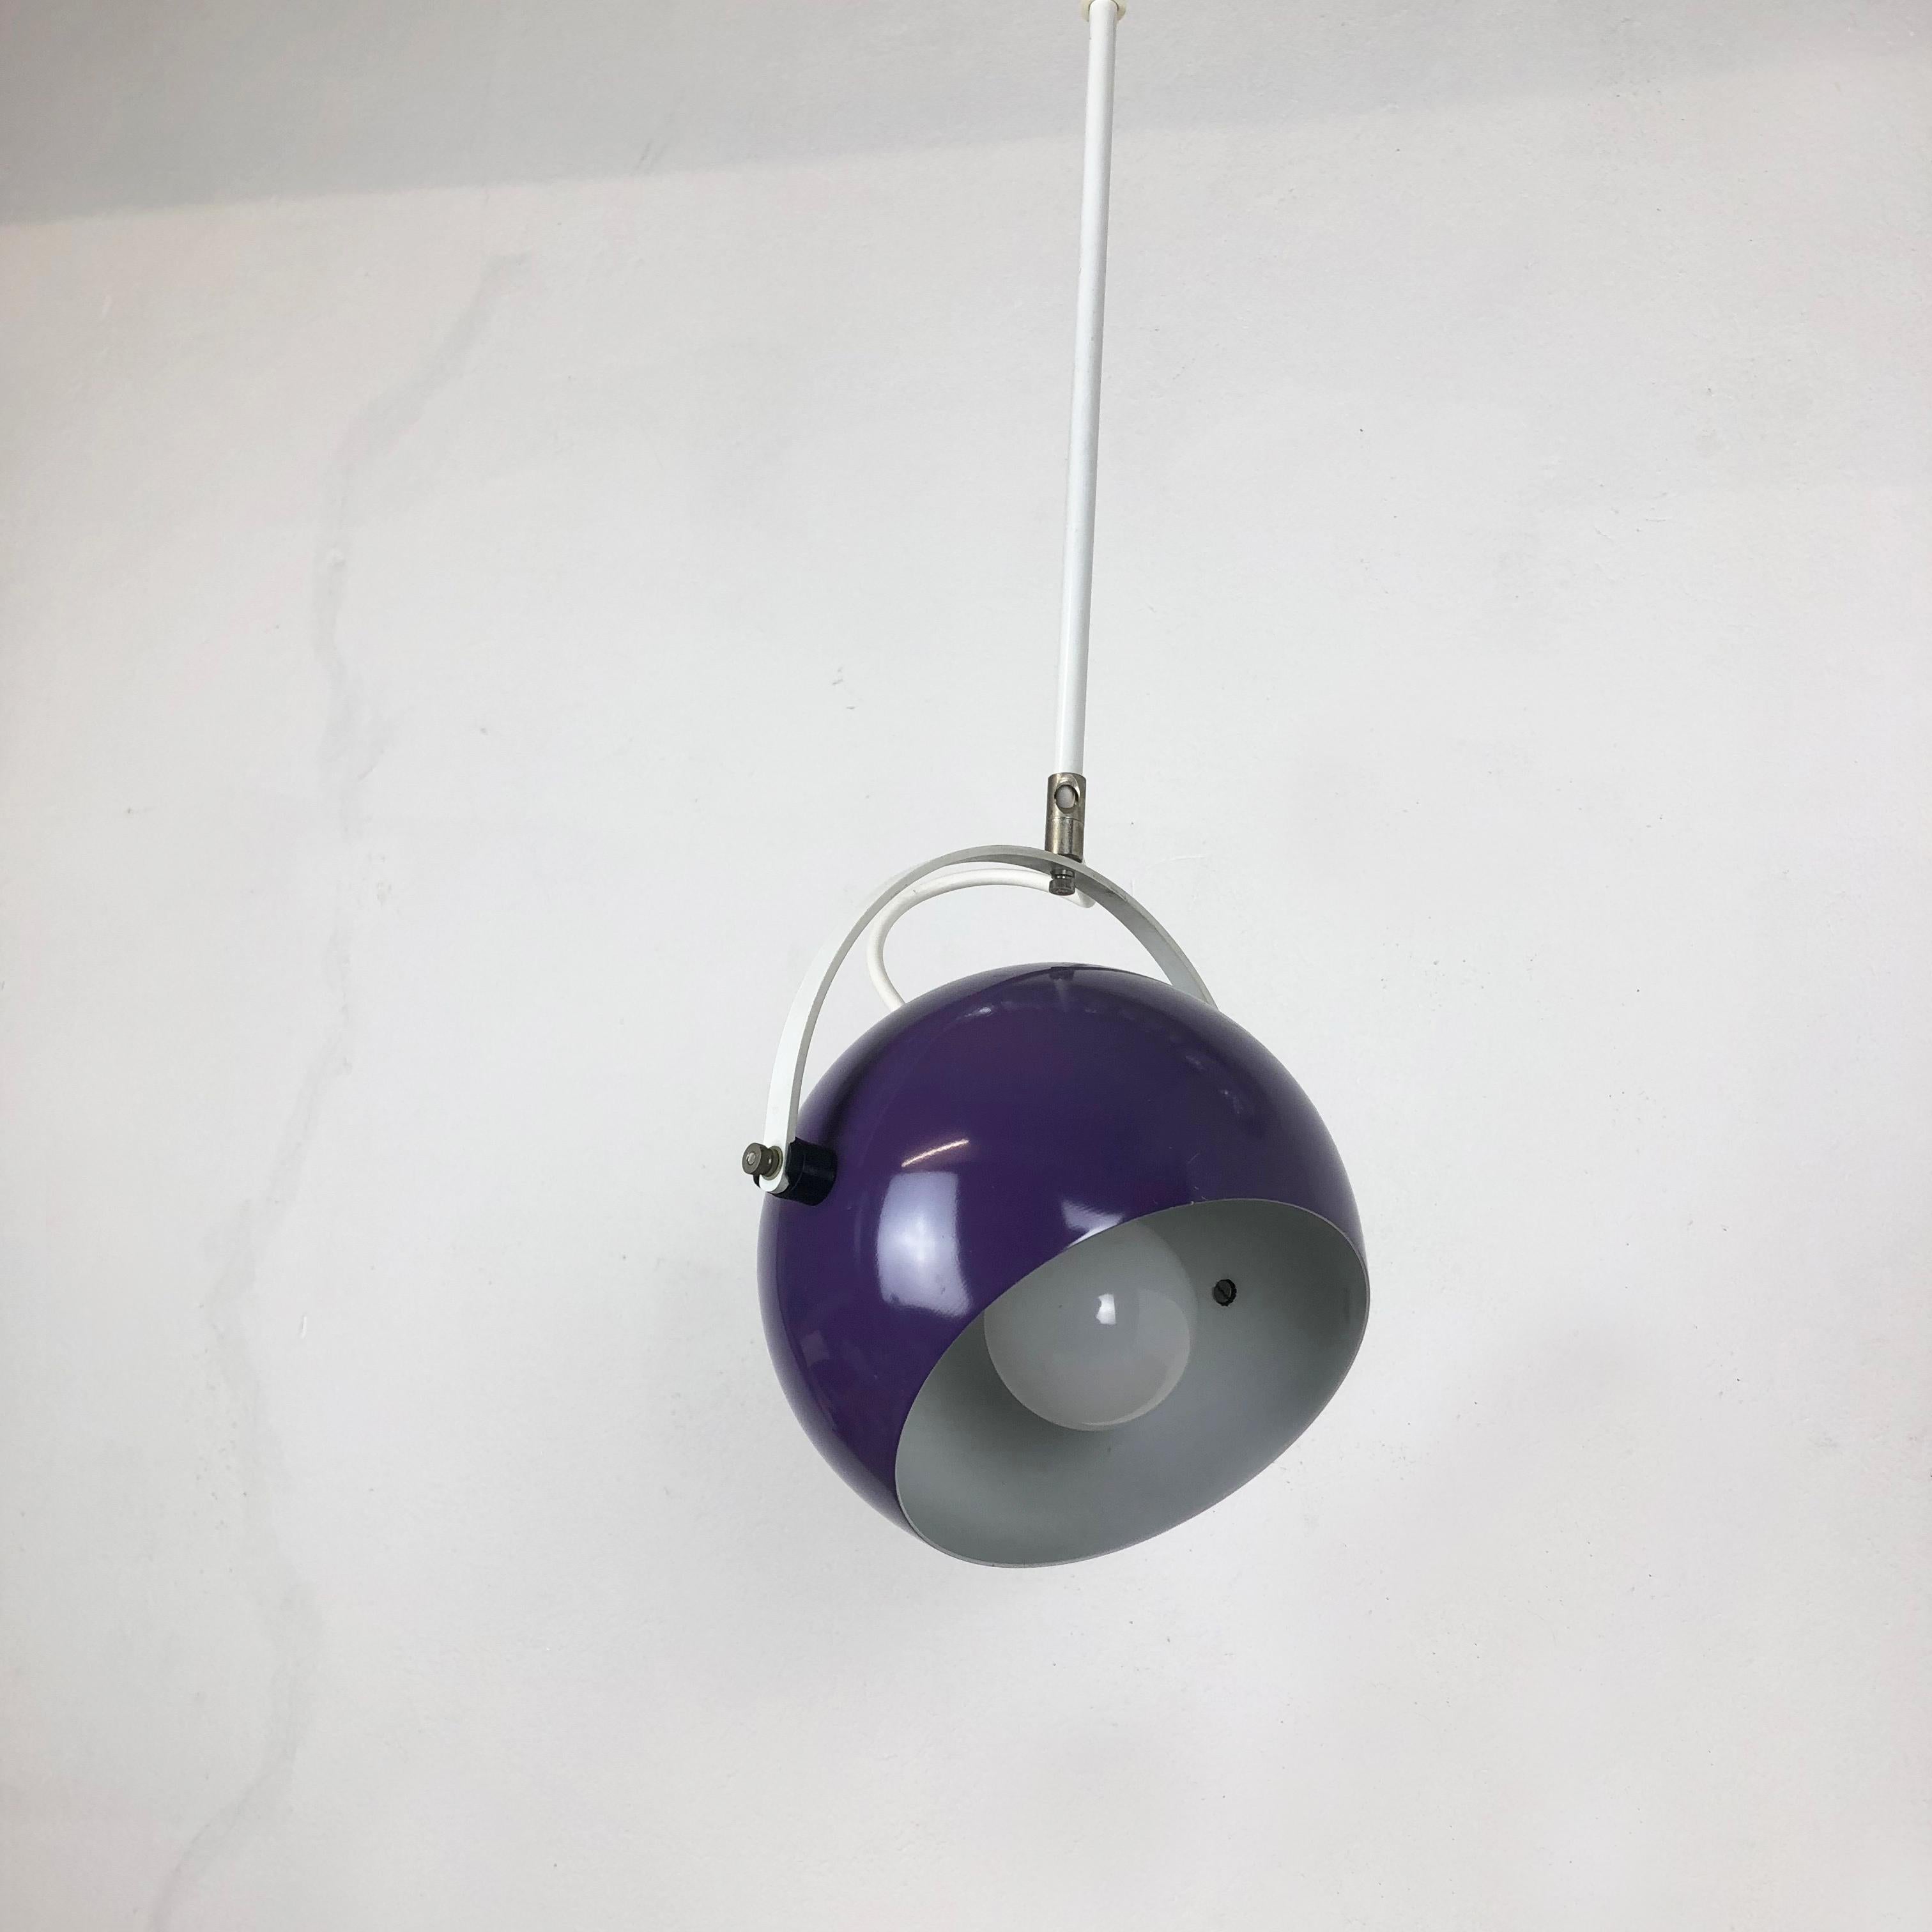 Adjustable Pop Art Panton Style Hanging Light with Purple Spot, Germany, 1970s In Good Condition For Sale In Kirchlengern, DE